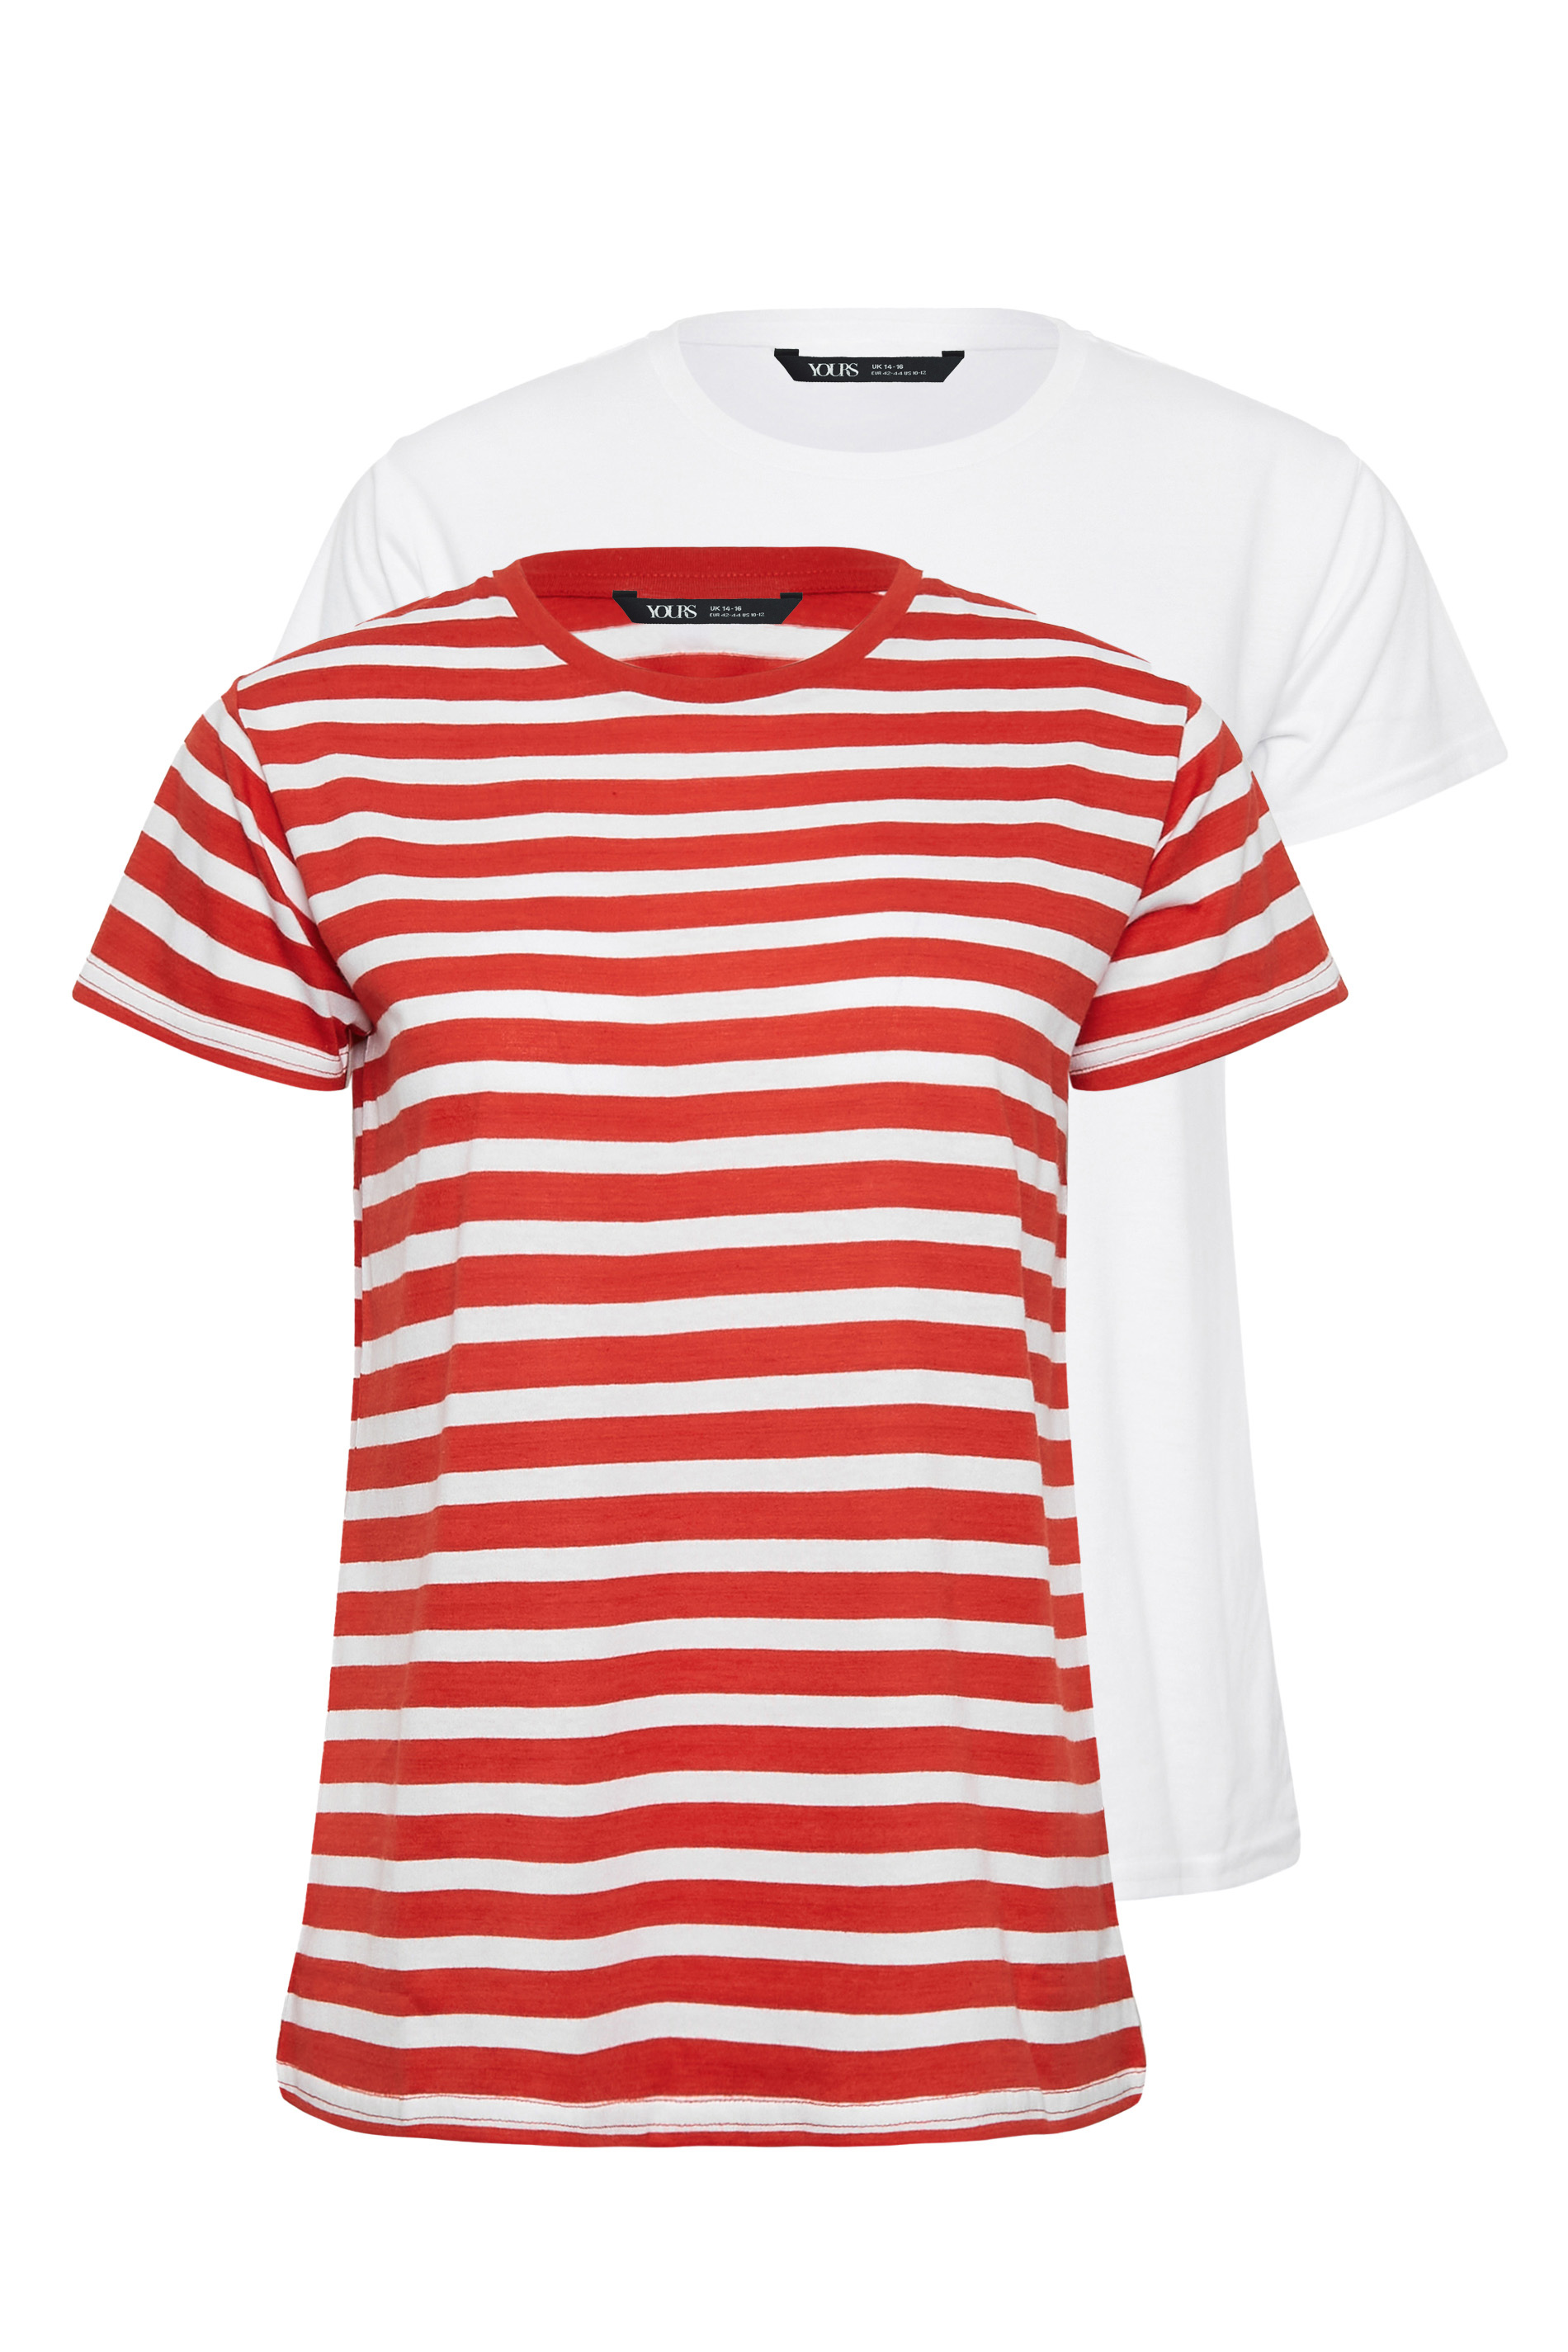 YOURS PETITE Plus Size 2 PACK Red & White Stripe T-Shirts | Yours Clothing 1